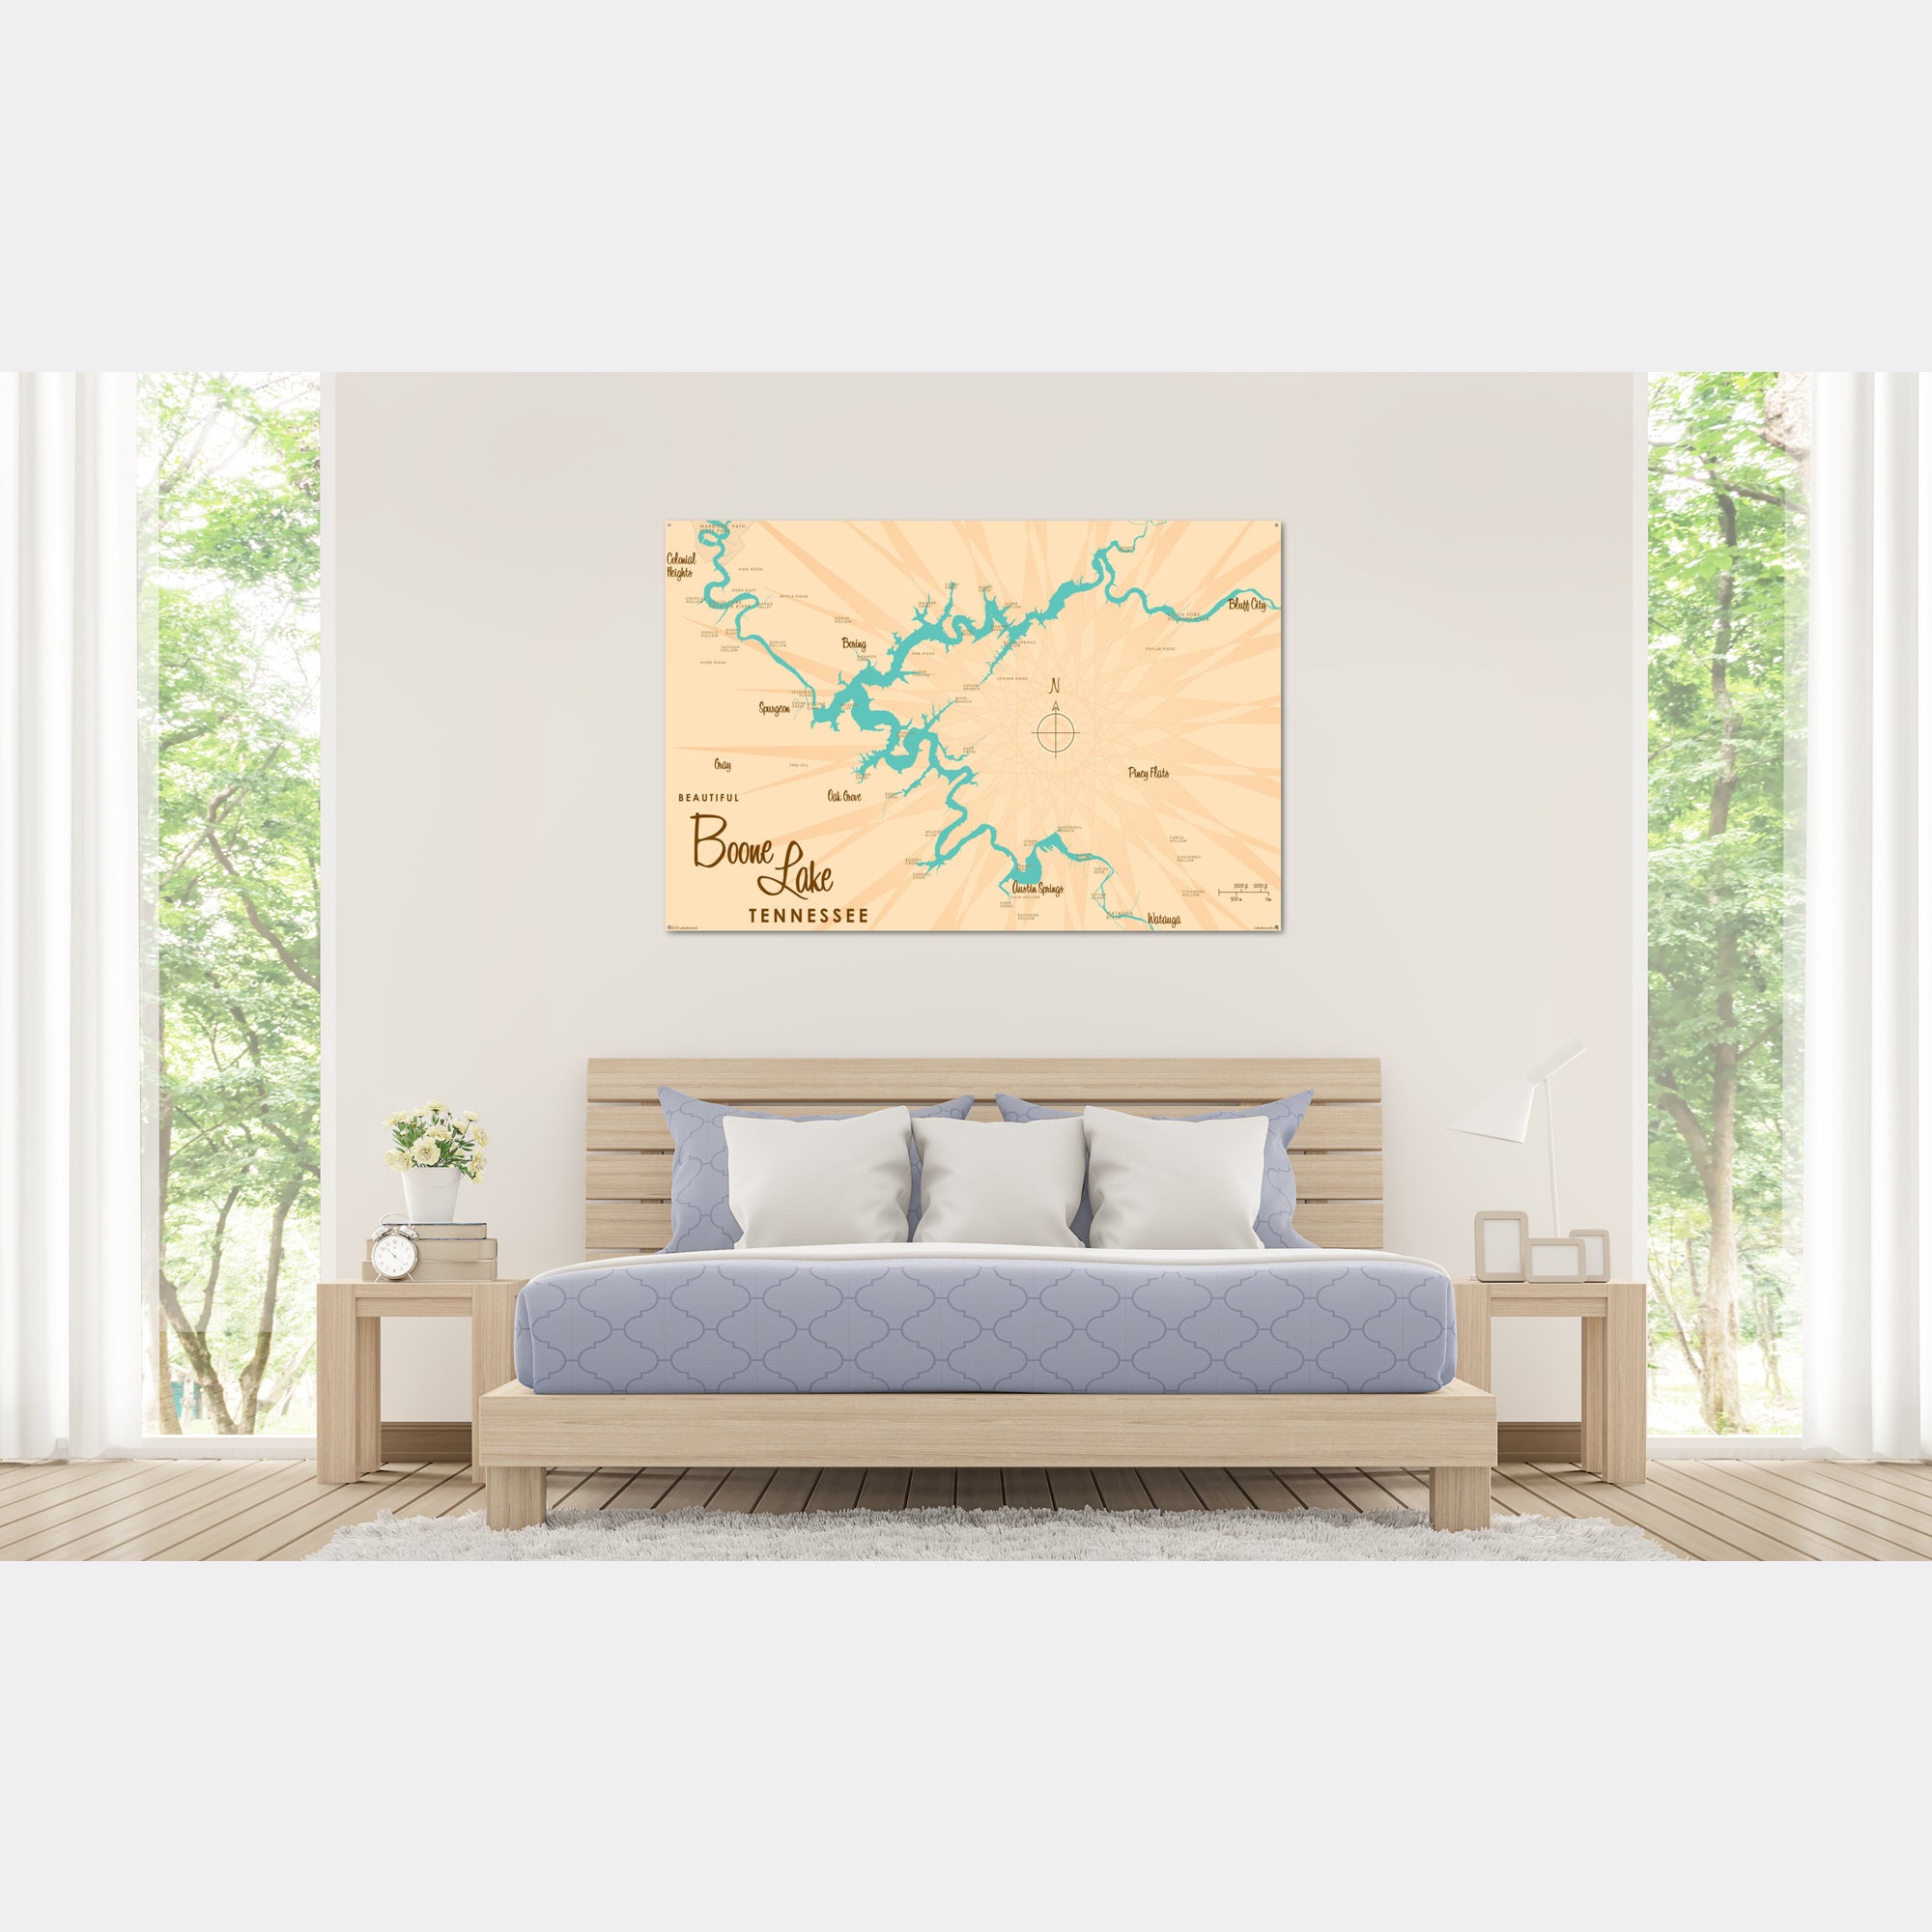 Boone Lake Tennessee, Metal Sign Map Art